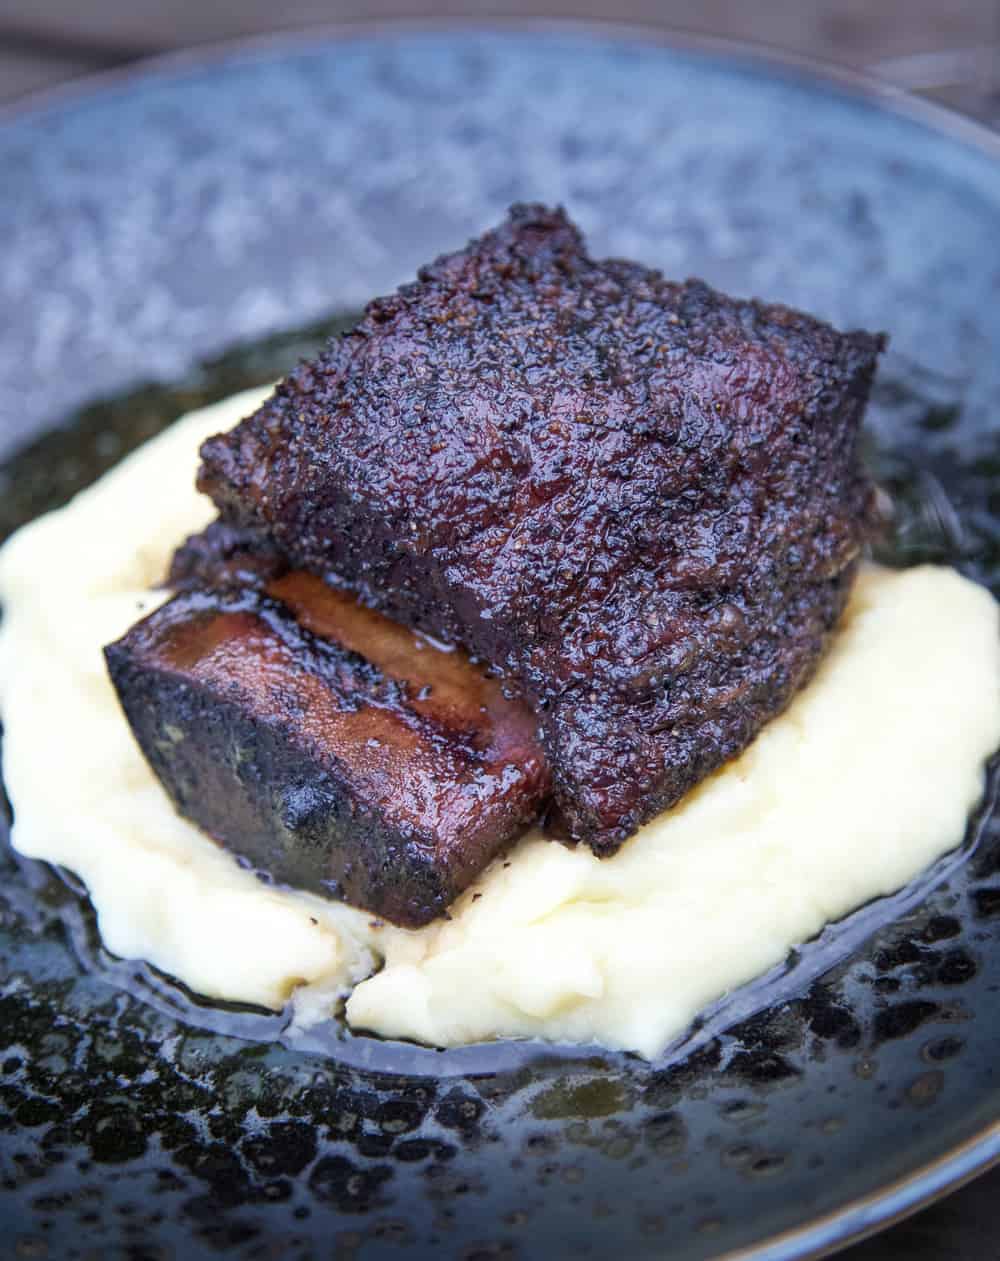 Smoked Beef Short Ribs on a plate with mashed potatoes